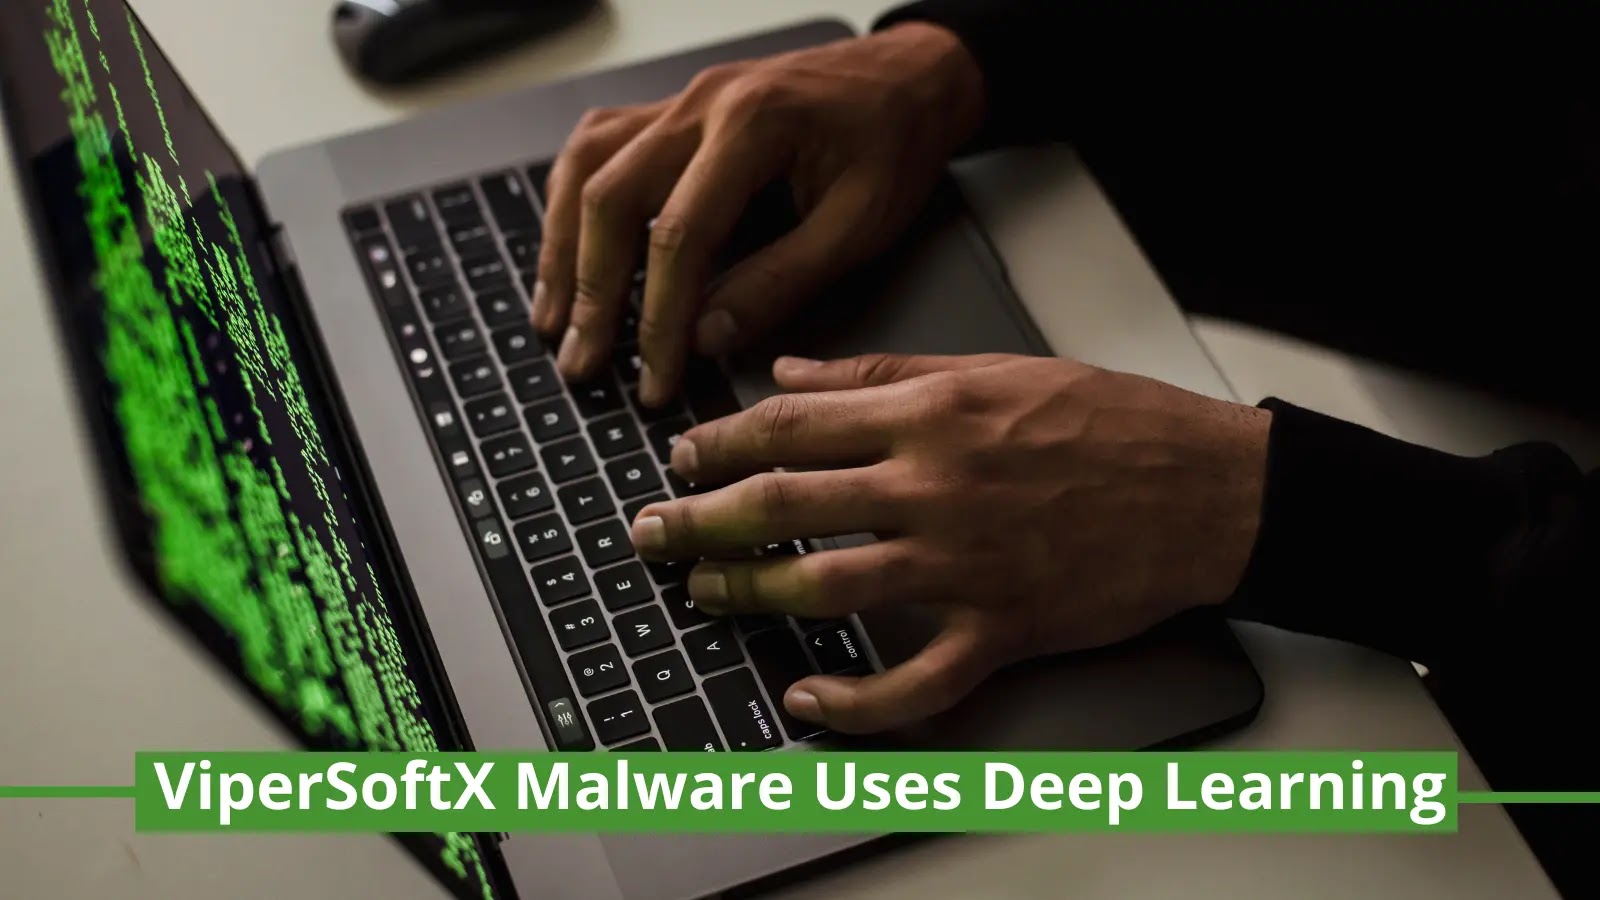 ViperSoftX Malware Uses Deep Learning Model To Execute Commands